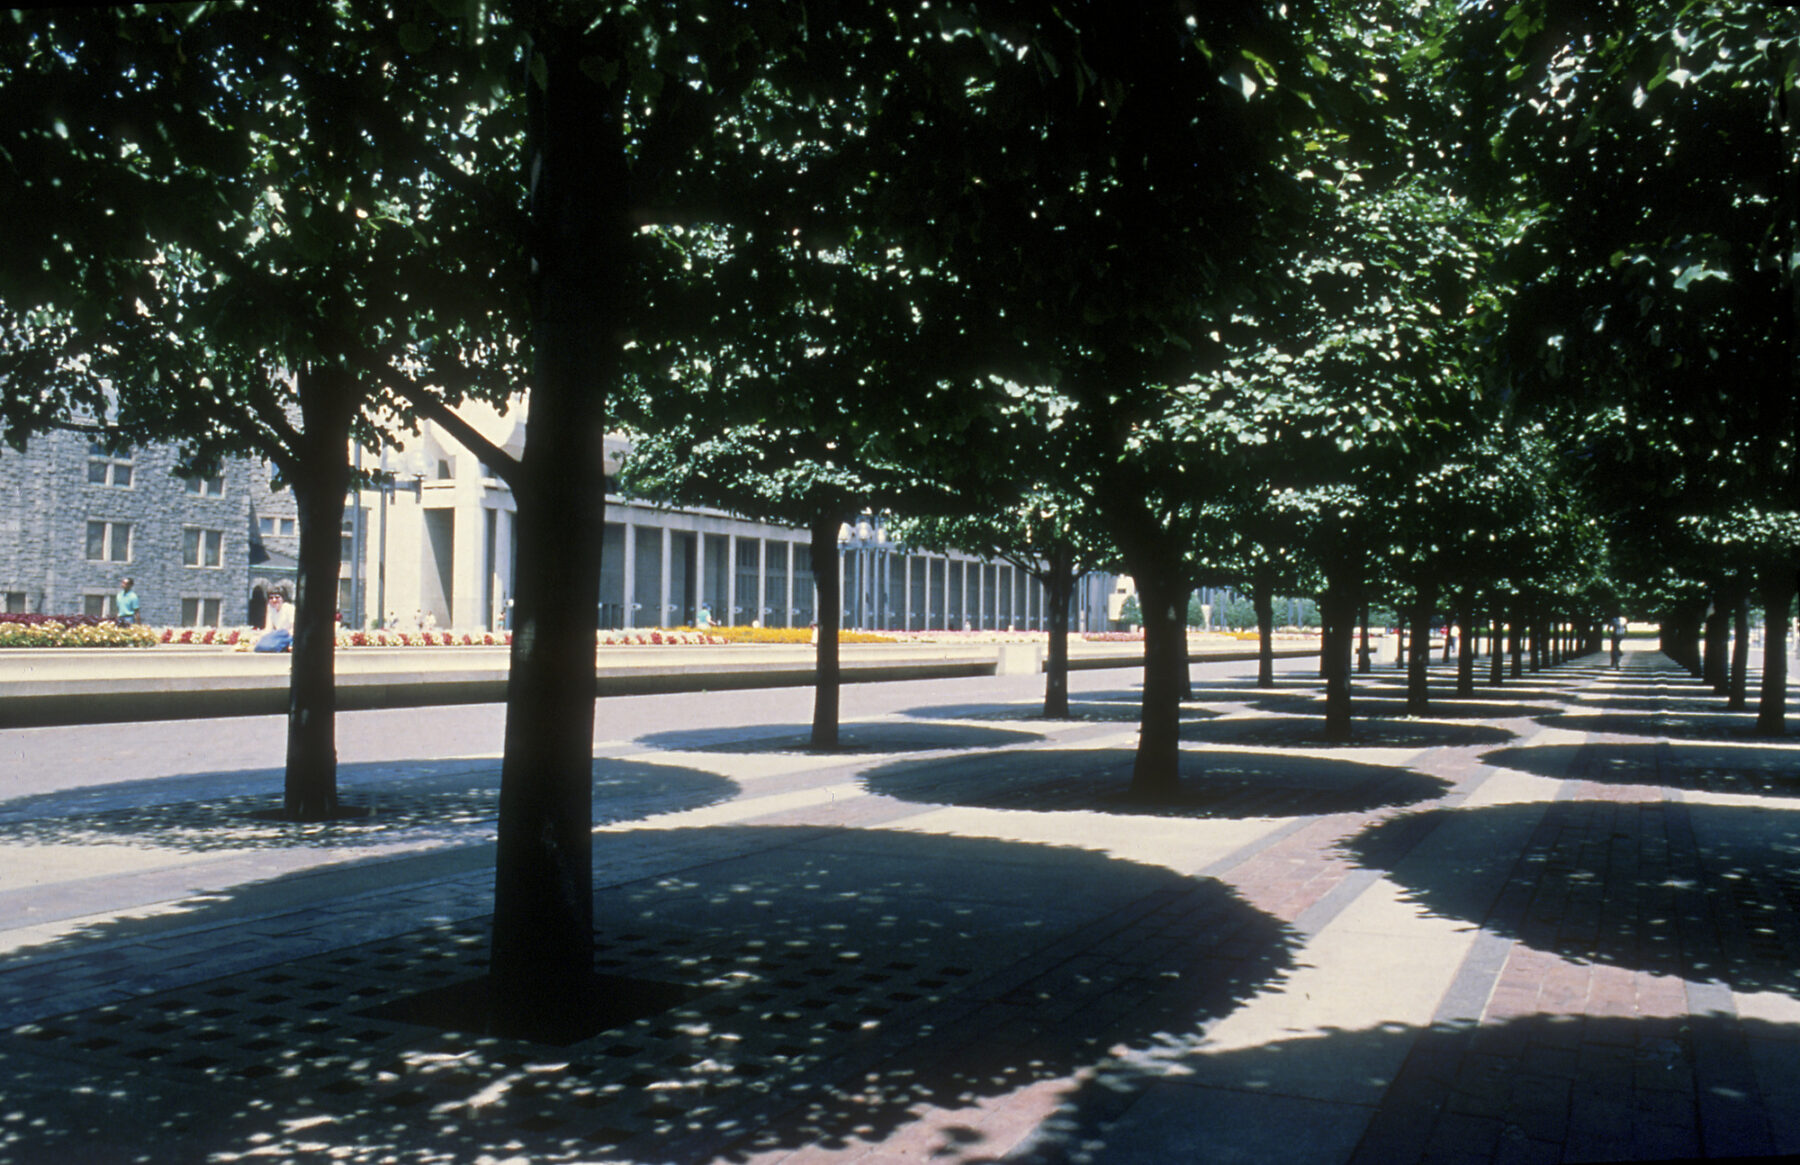 photograph taken in the shade beneath a row of linden trees with views towards reflecting pool